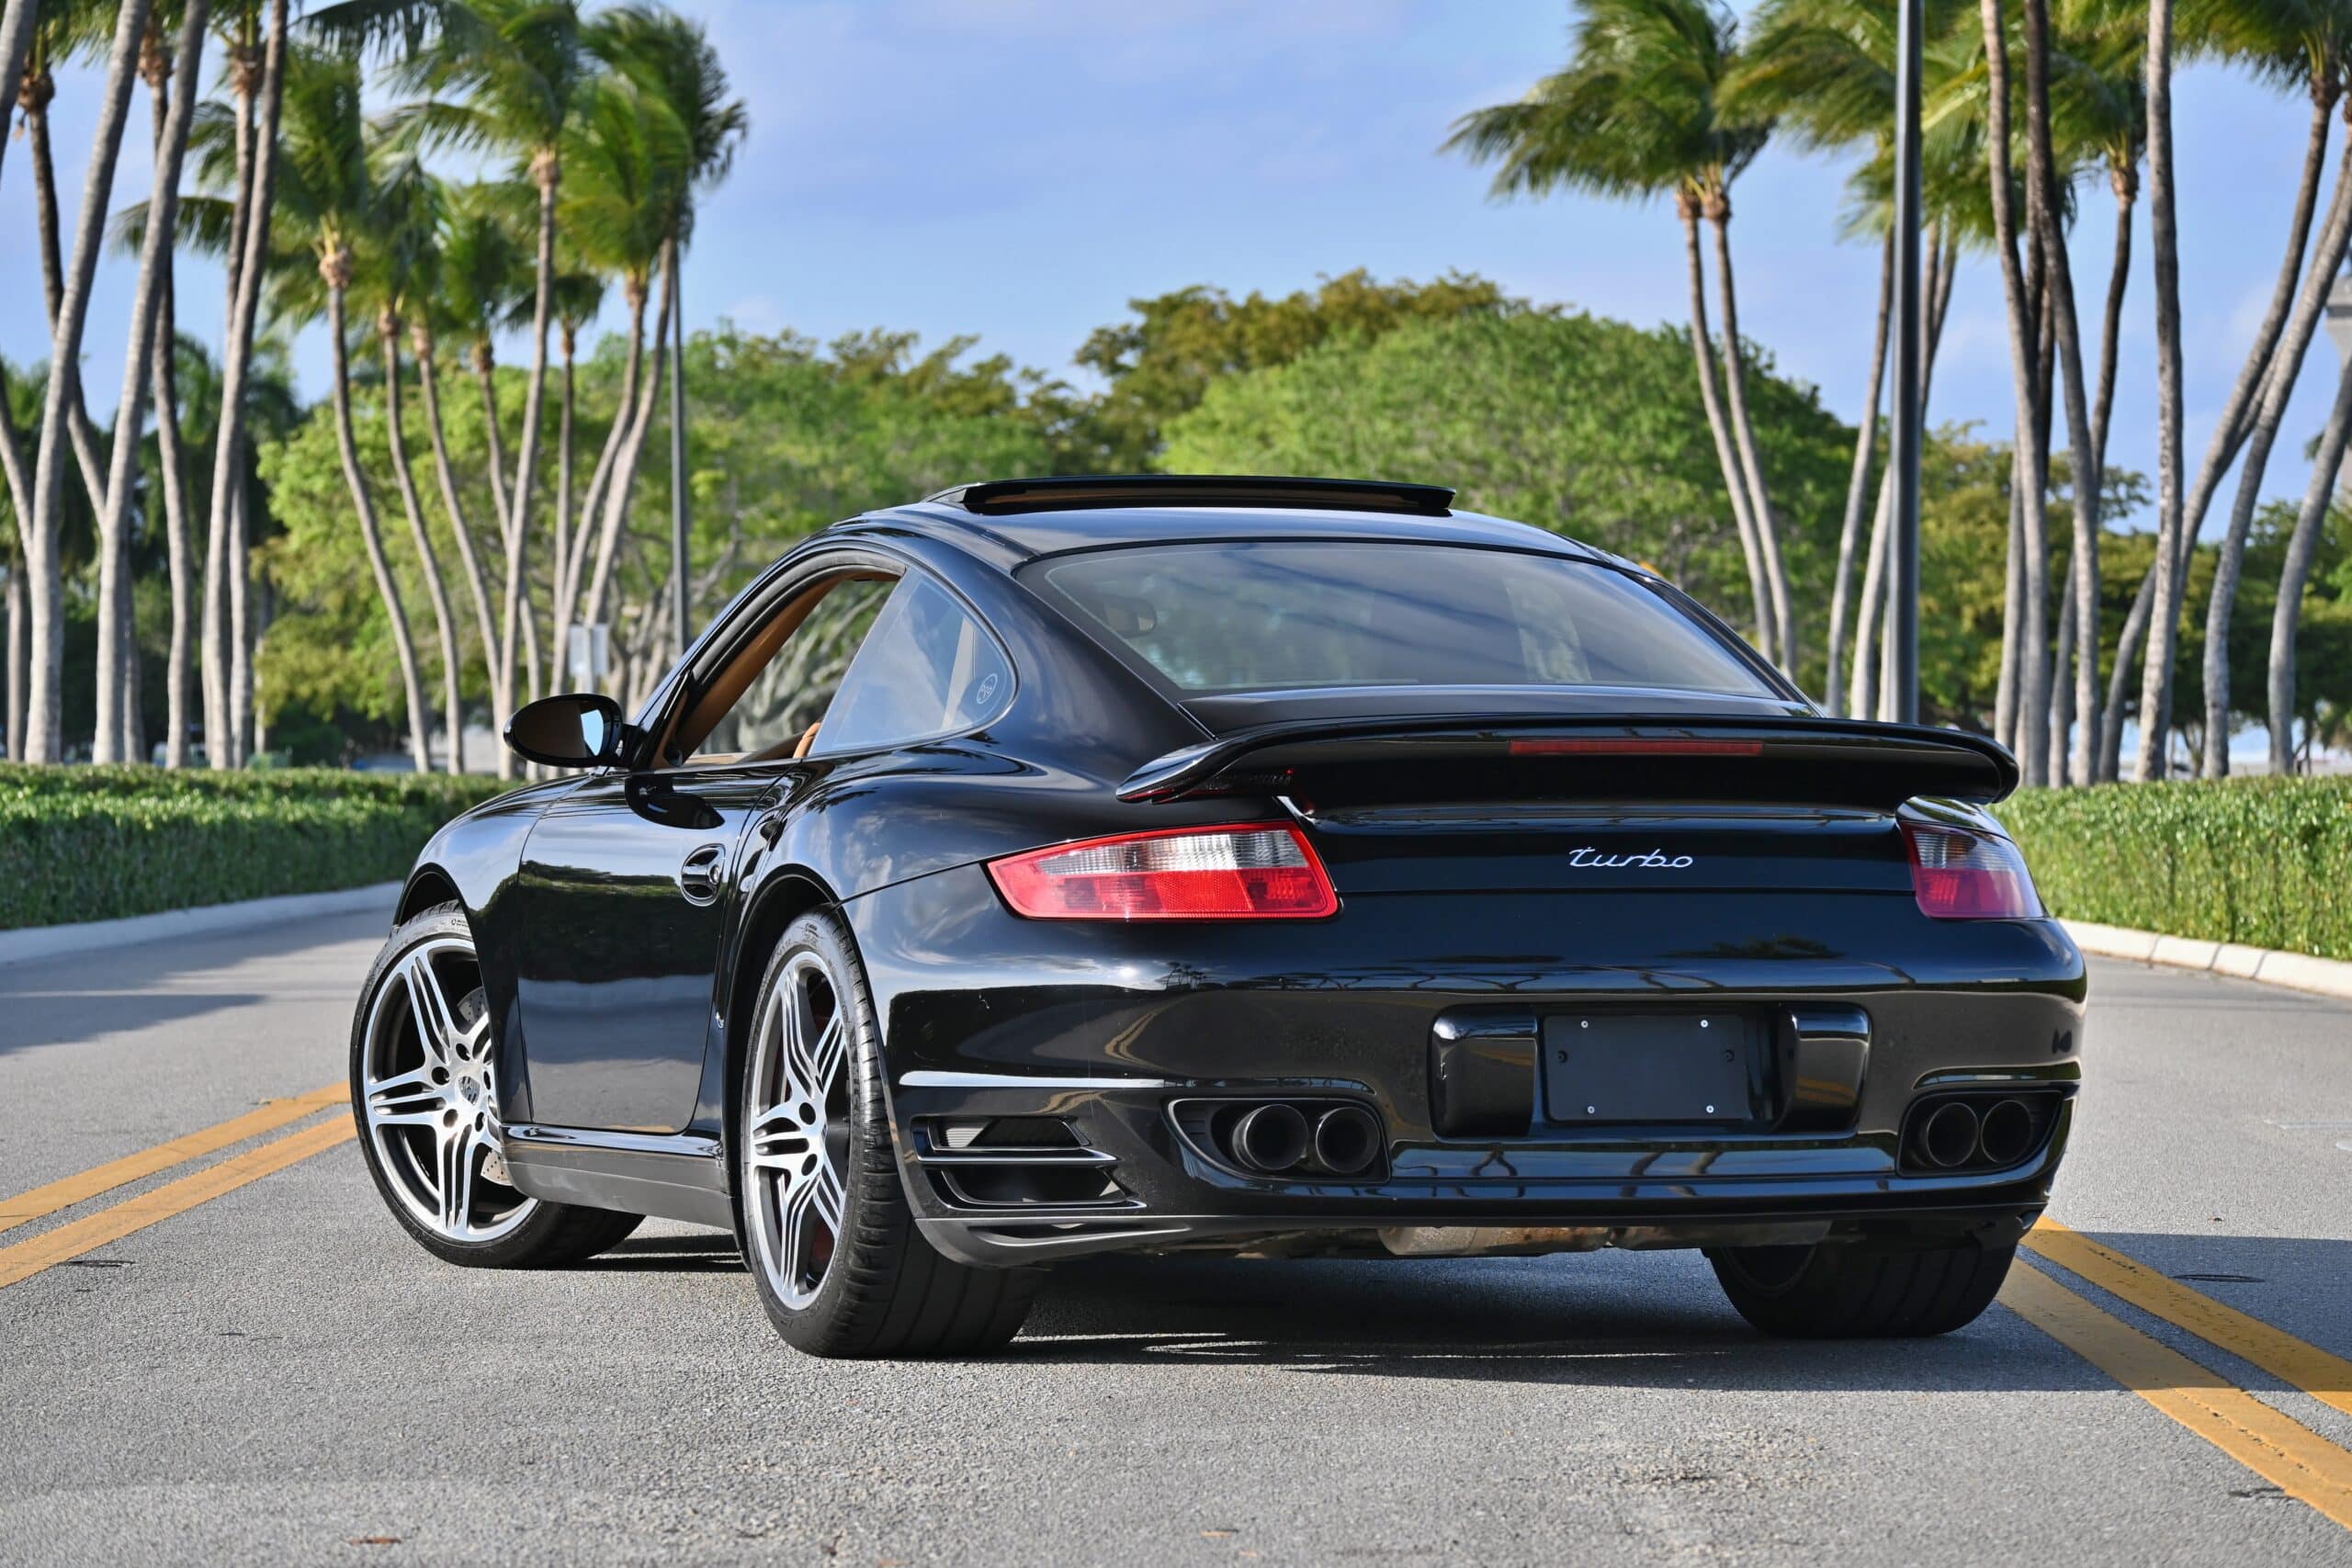 2007 Porsche 911 Turbo (997.1) 35k miles | All original paint metered | Service records | 6 Speed Manual | Beautiful condition